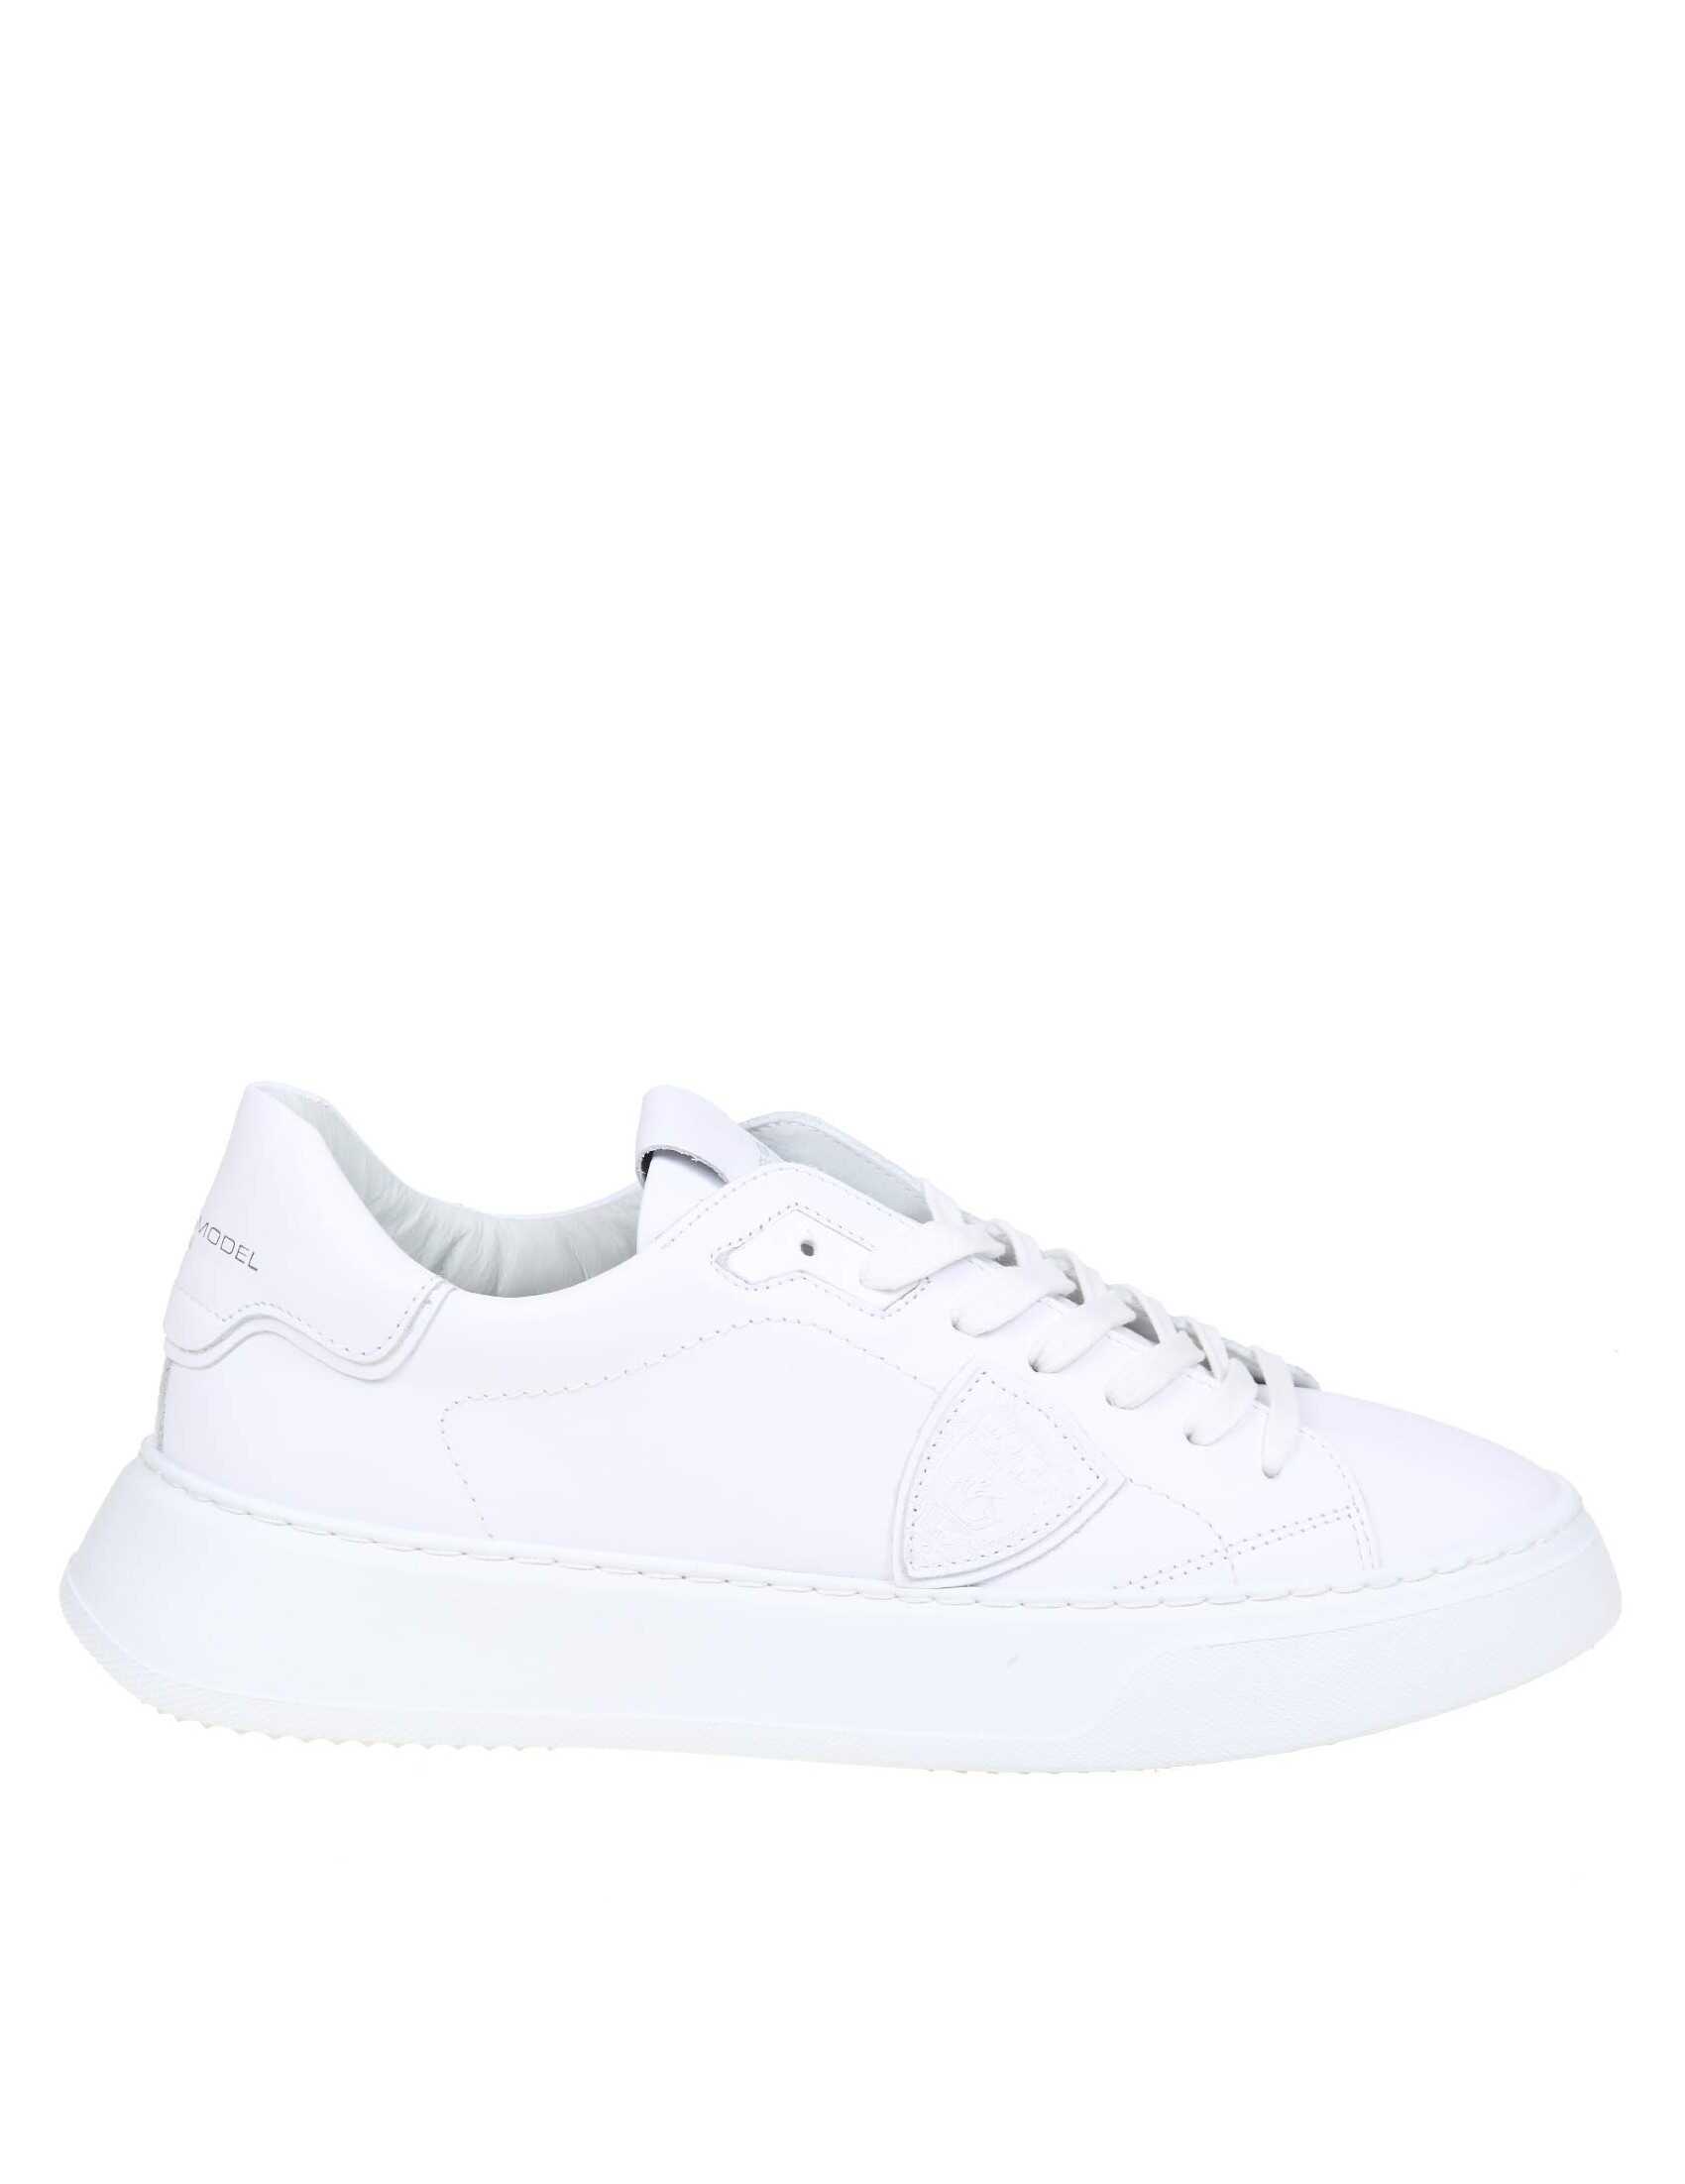 Philippe Model Philippe model temple sneakers in white leather Black